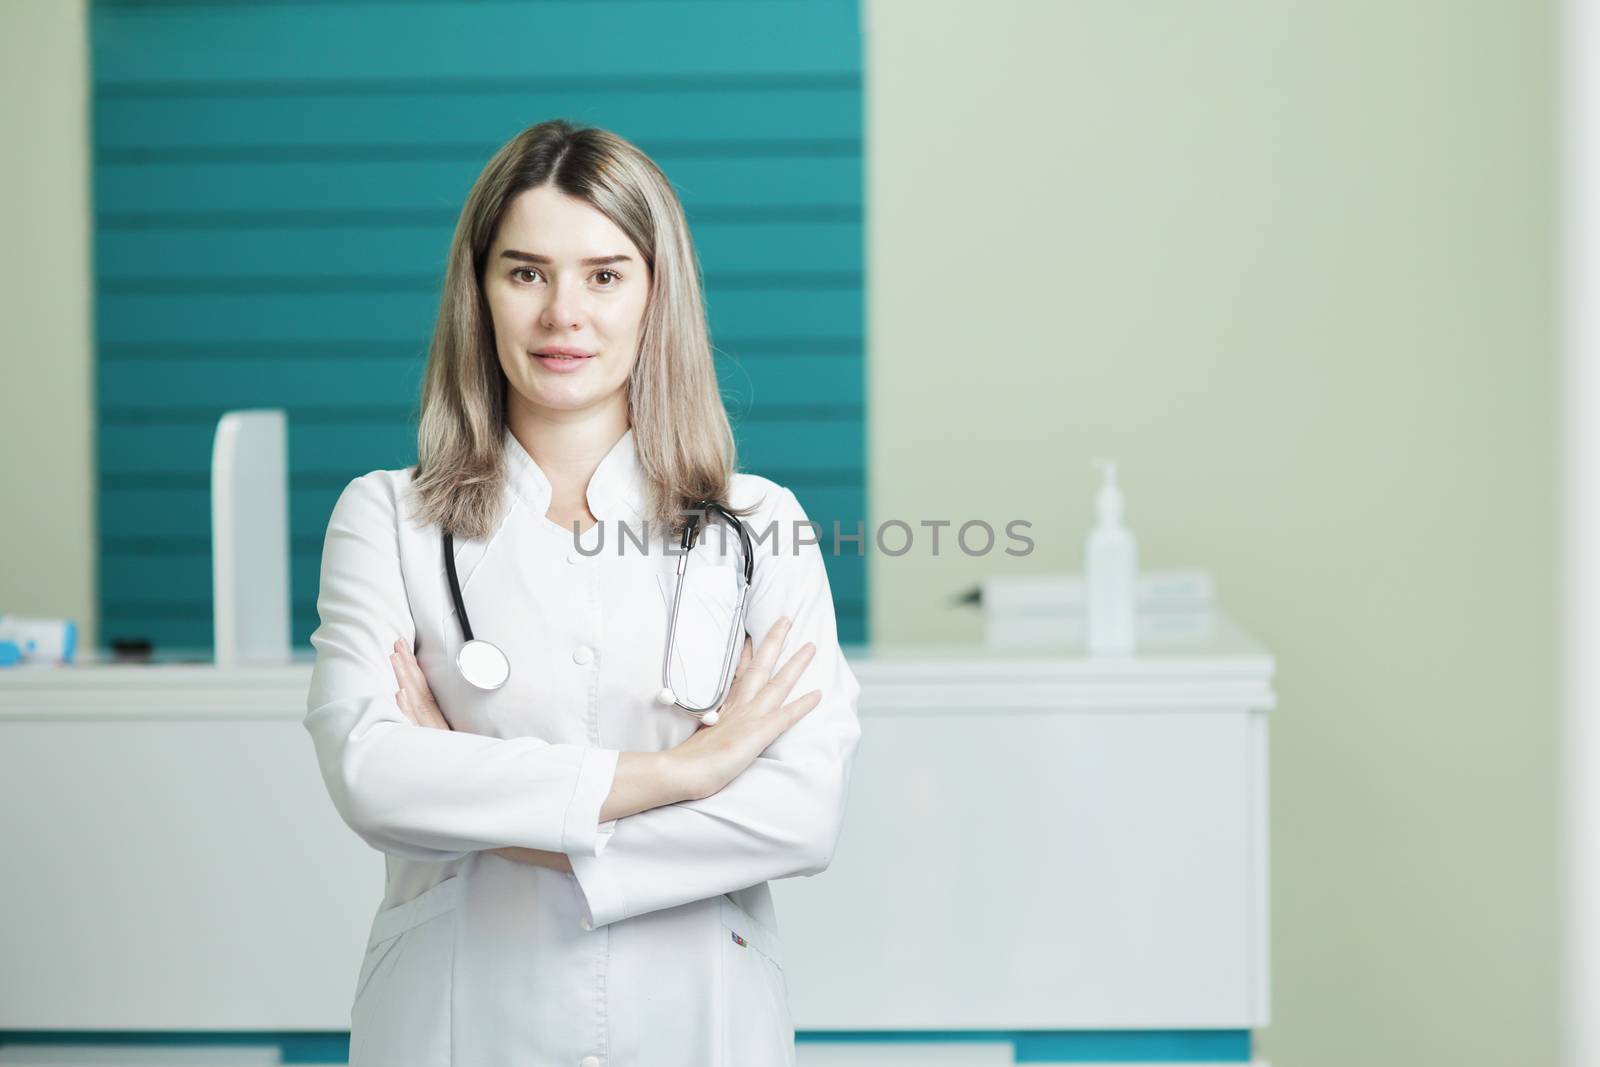 Female doctor or nurse in medical uniform, stethoscope on neck by selinsmo